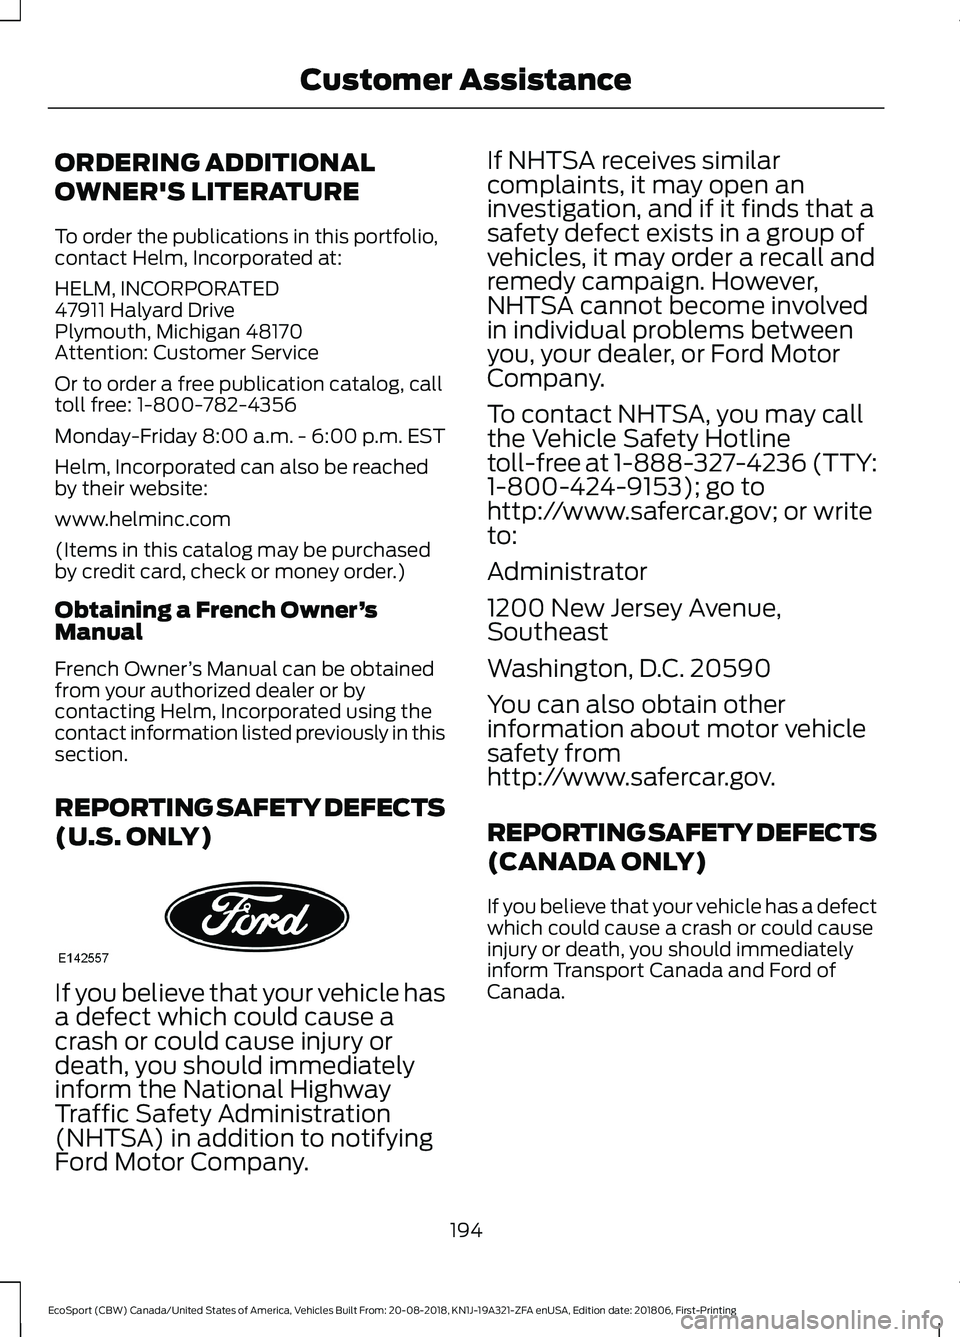 FORD ECOSPORT 2019 Owners Guide ORDERING ADDITIONAL
OWNER'S LITERATURE
To order the publications in this portfolio,contact Helm, Incorporated at:
HELM, INCORPORATED47911 Halyard DrivePlymouth, Michigan 48170Attention: Customer S